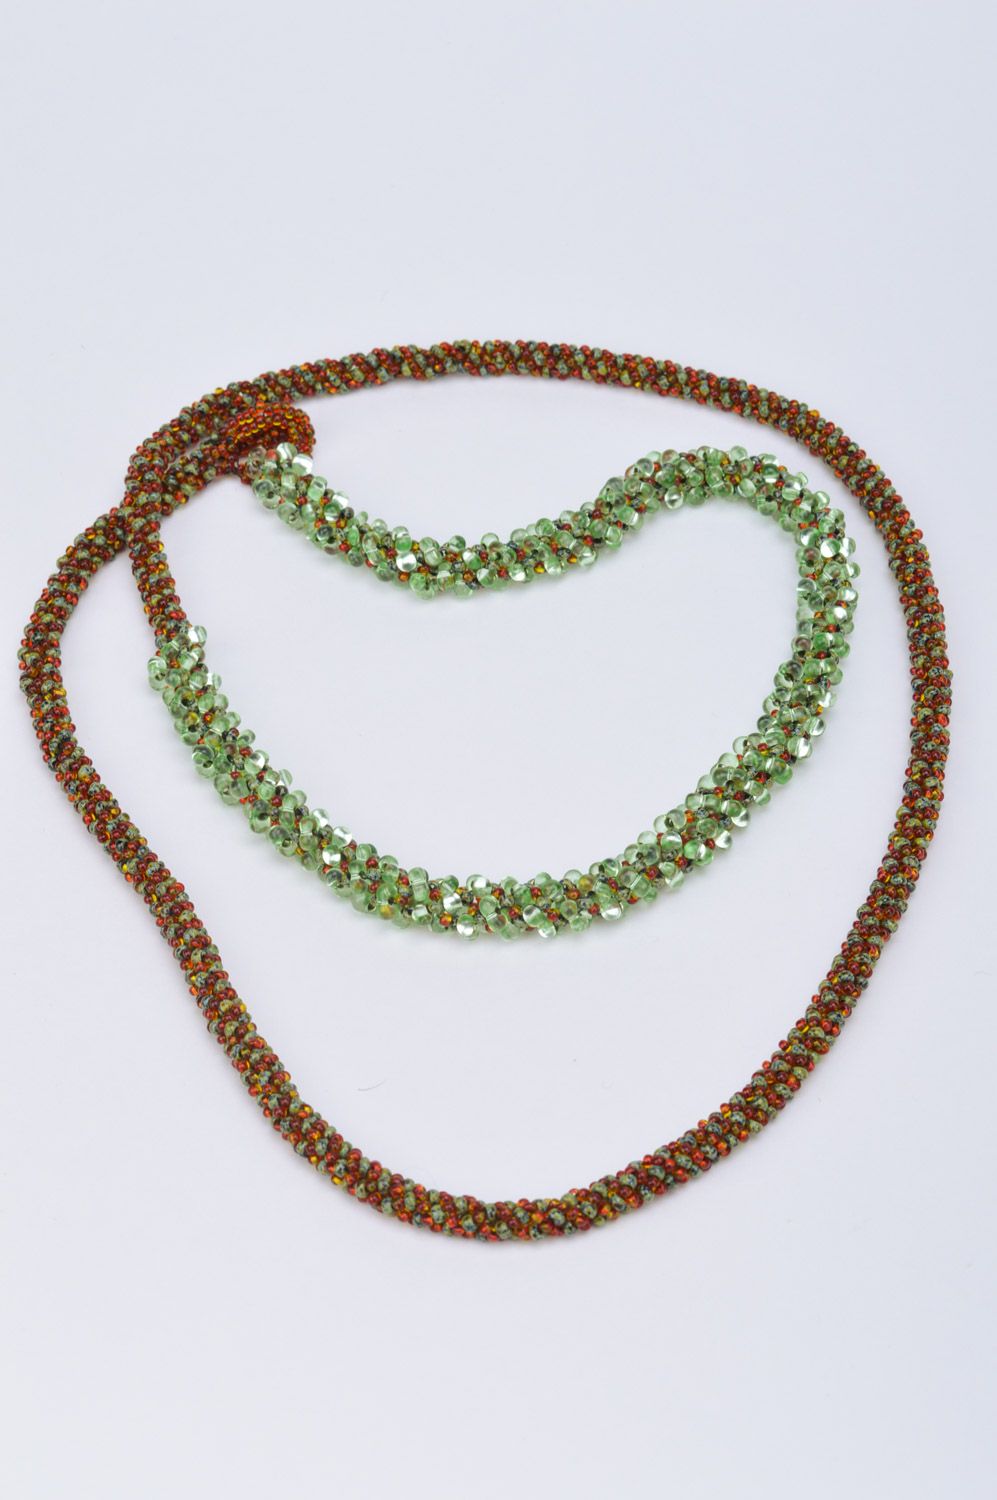 Stylish handmade beaded cord necklace in green and brown colors for every day photo 5